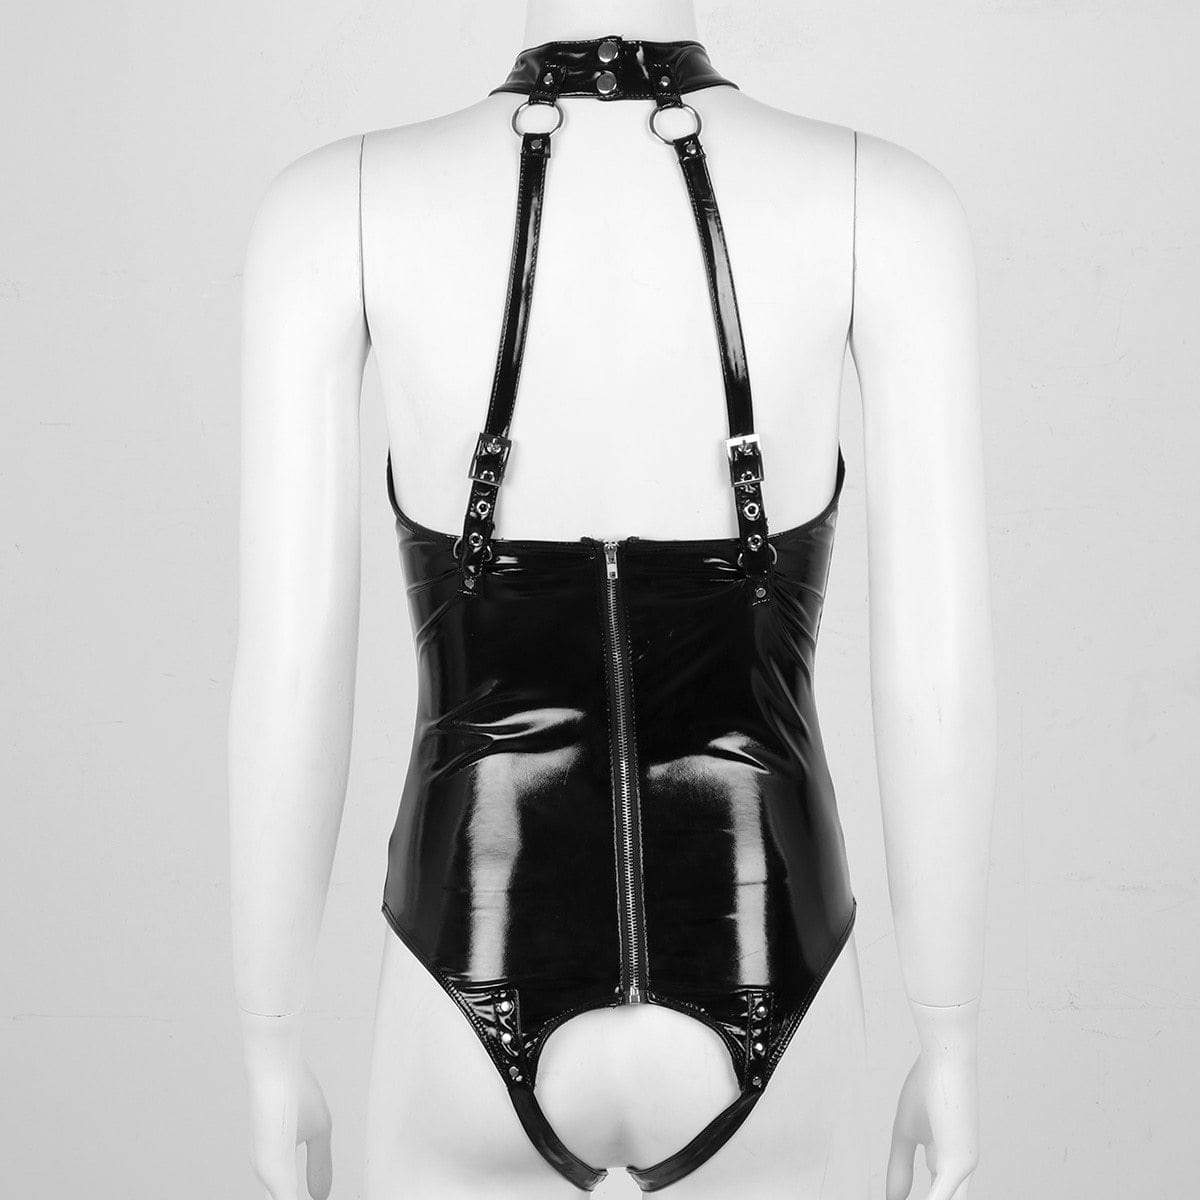 Kinky Cloth 200001800 Bare Breast Latex Crotchless Bodysuit